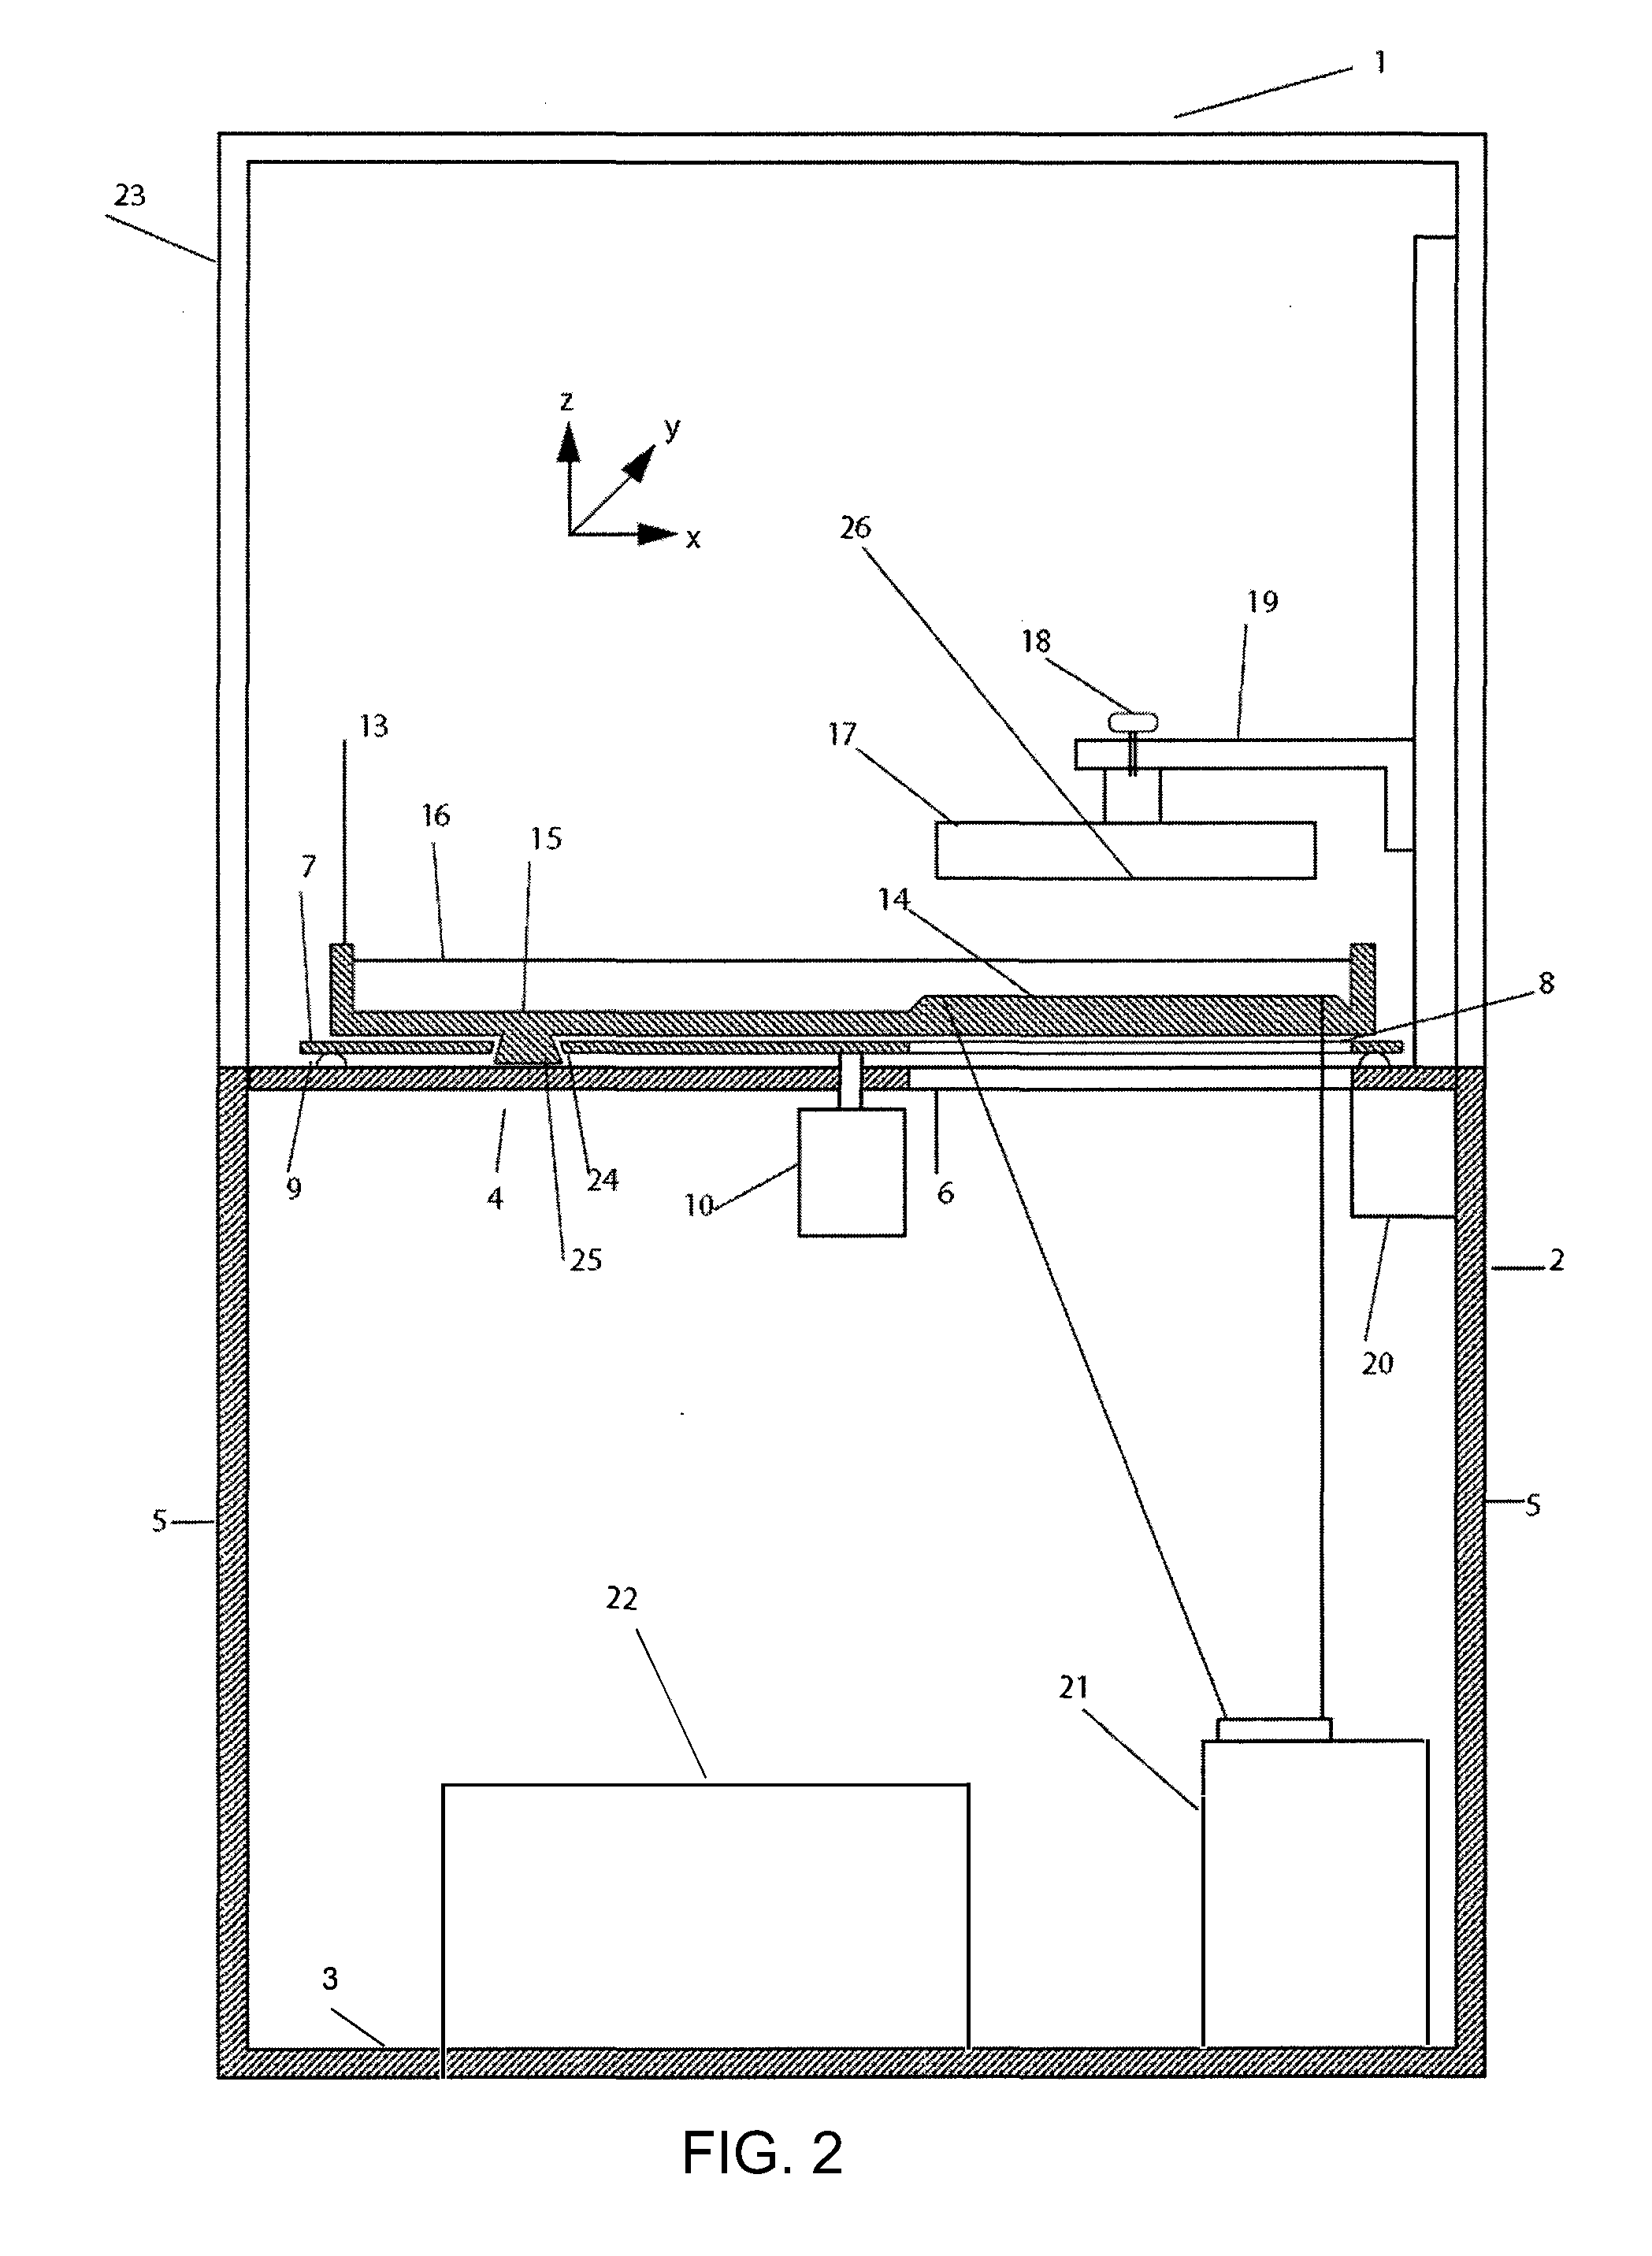 Apparatus for fabrication of three dimensional objects